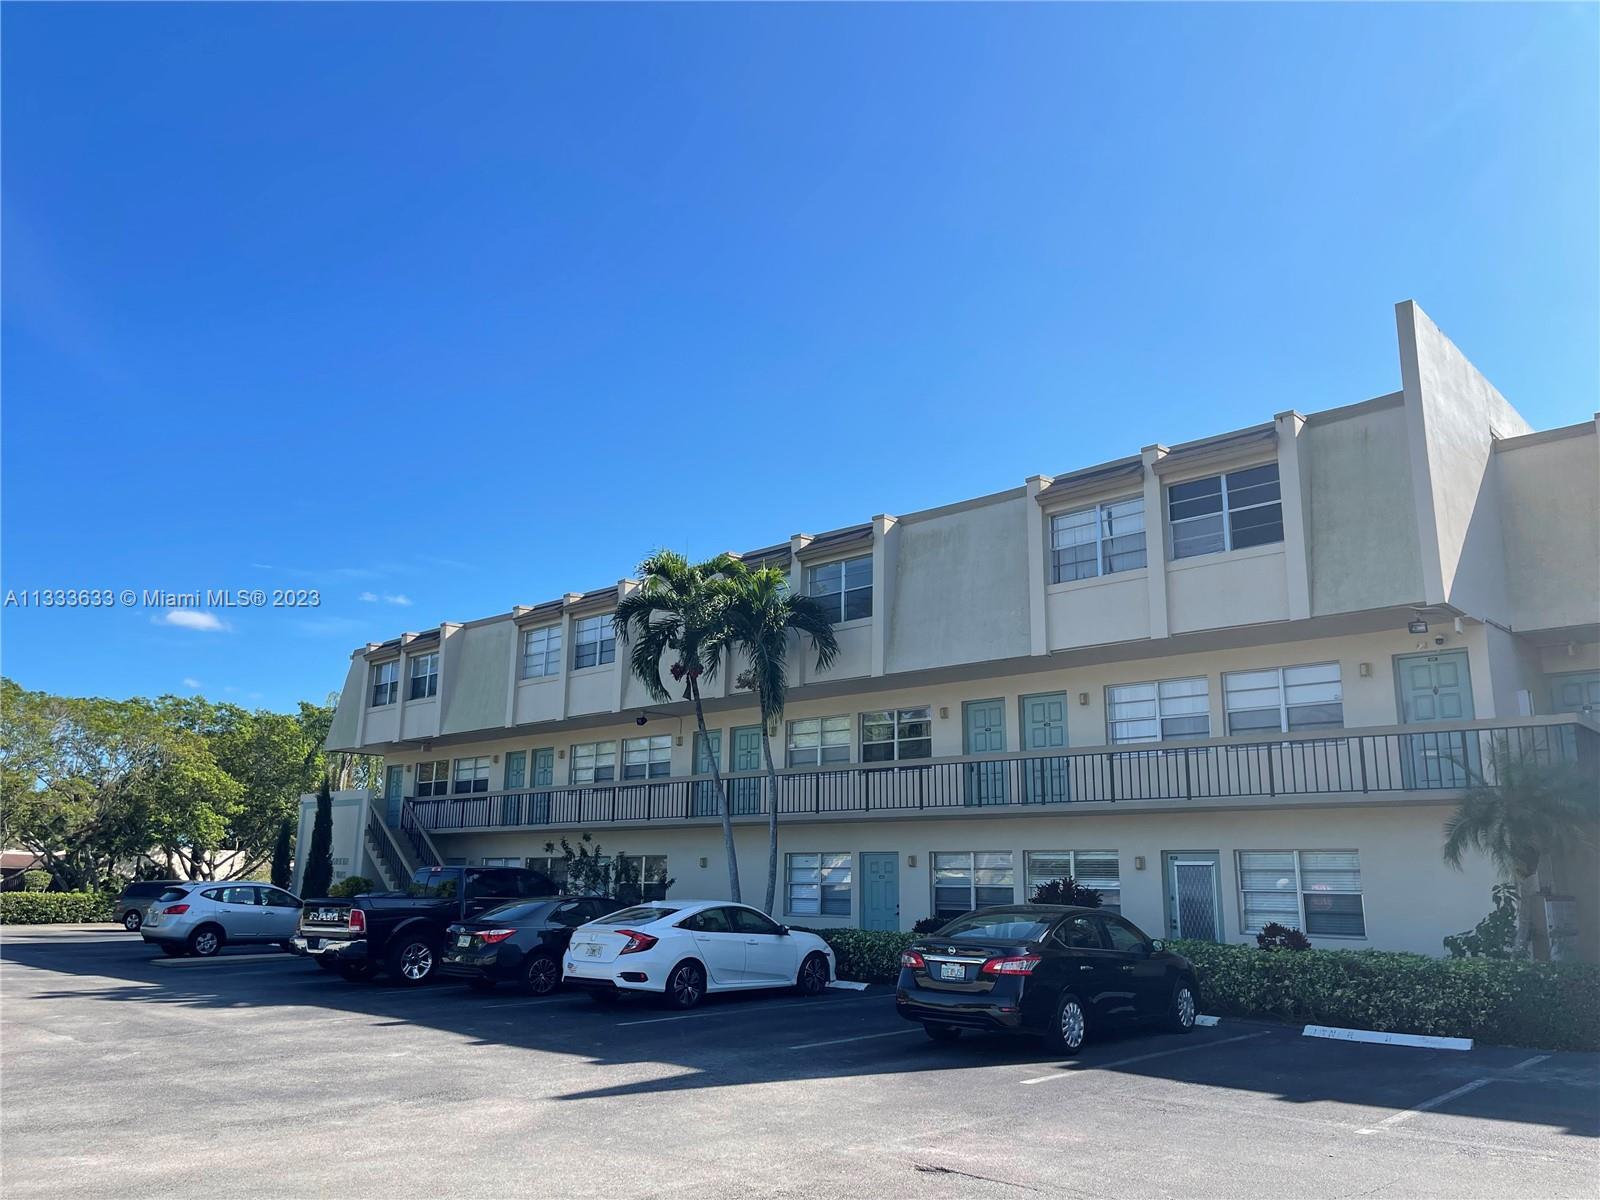 Priced To SELL FAST! Town House Style Condo BEST VALUE IN BOCA RATON Spacious 1336 Sq.Ft. 2 Large Be